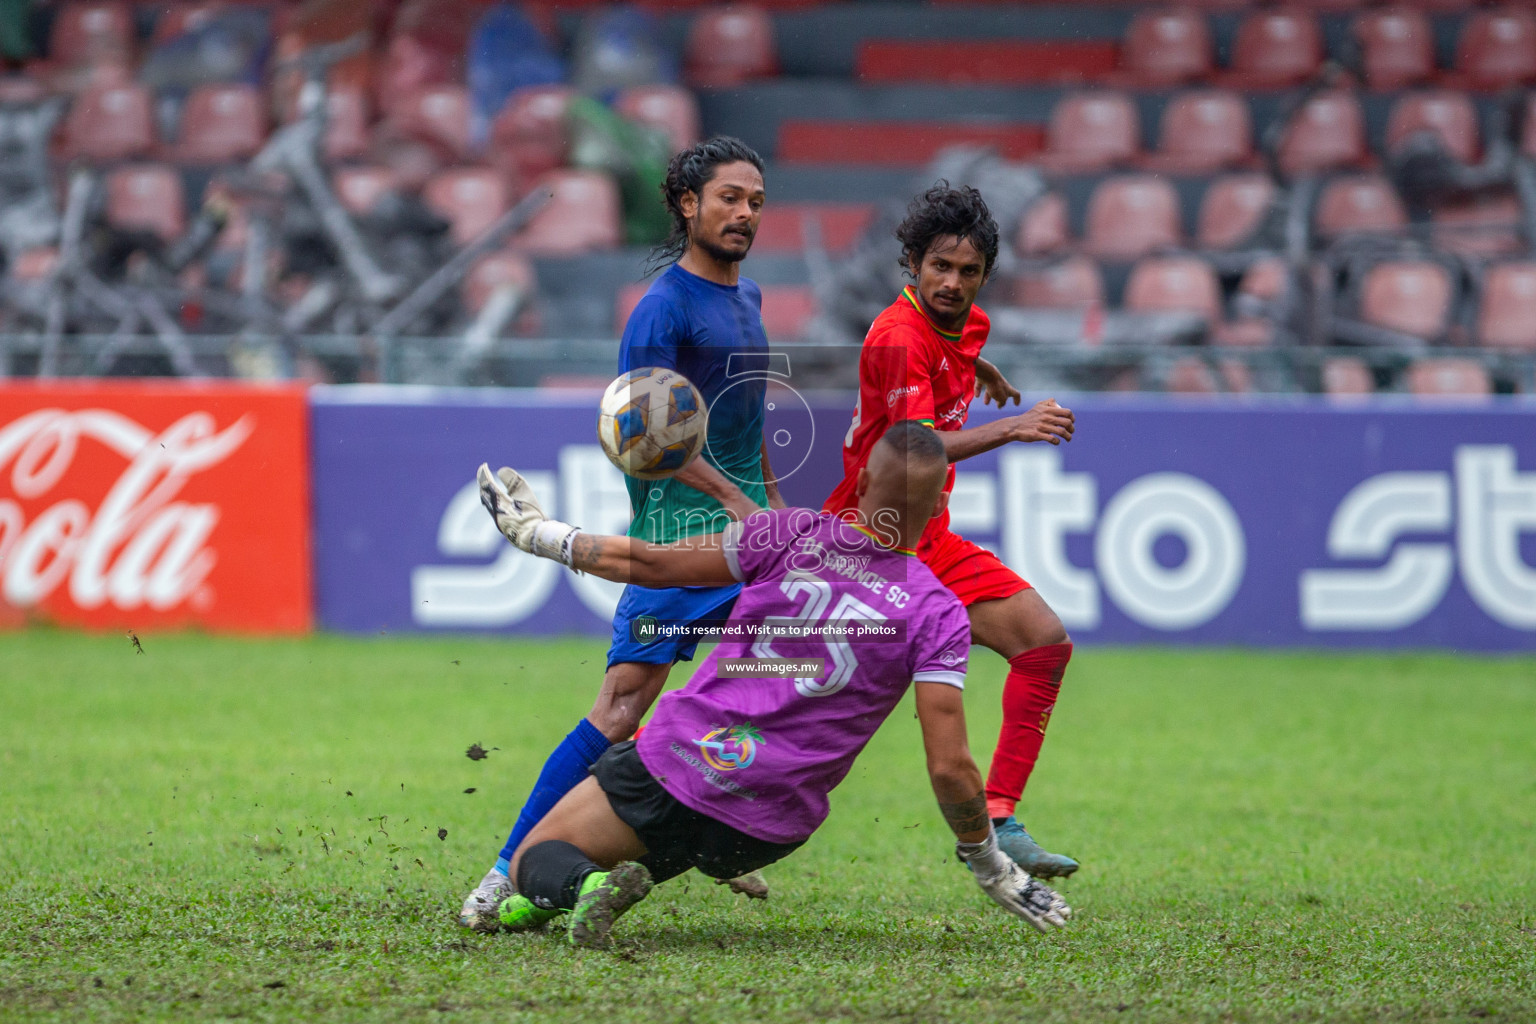 Da Grande Sports Club vs Super United Sports in Ooredoo Dhivehi Premier League 2021/22 on 31st July 2022, held in National Football Stadium, Male', Maldives Photos: Ismail Thoriq/ Images mv